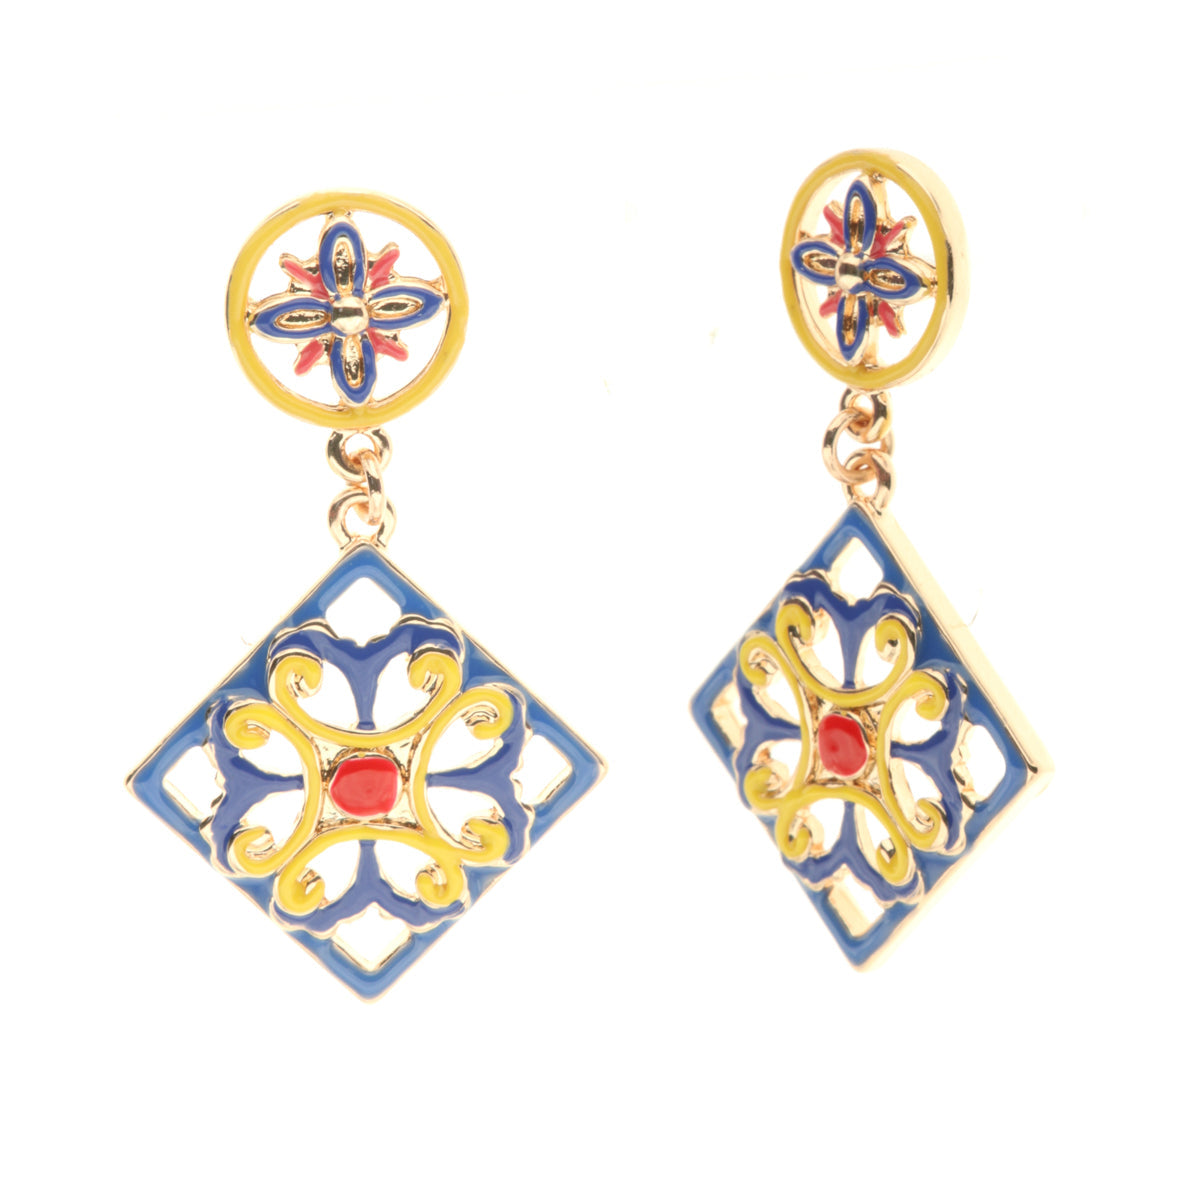 Metal earrings with yellow and red blue enamel -glazed majolica